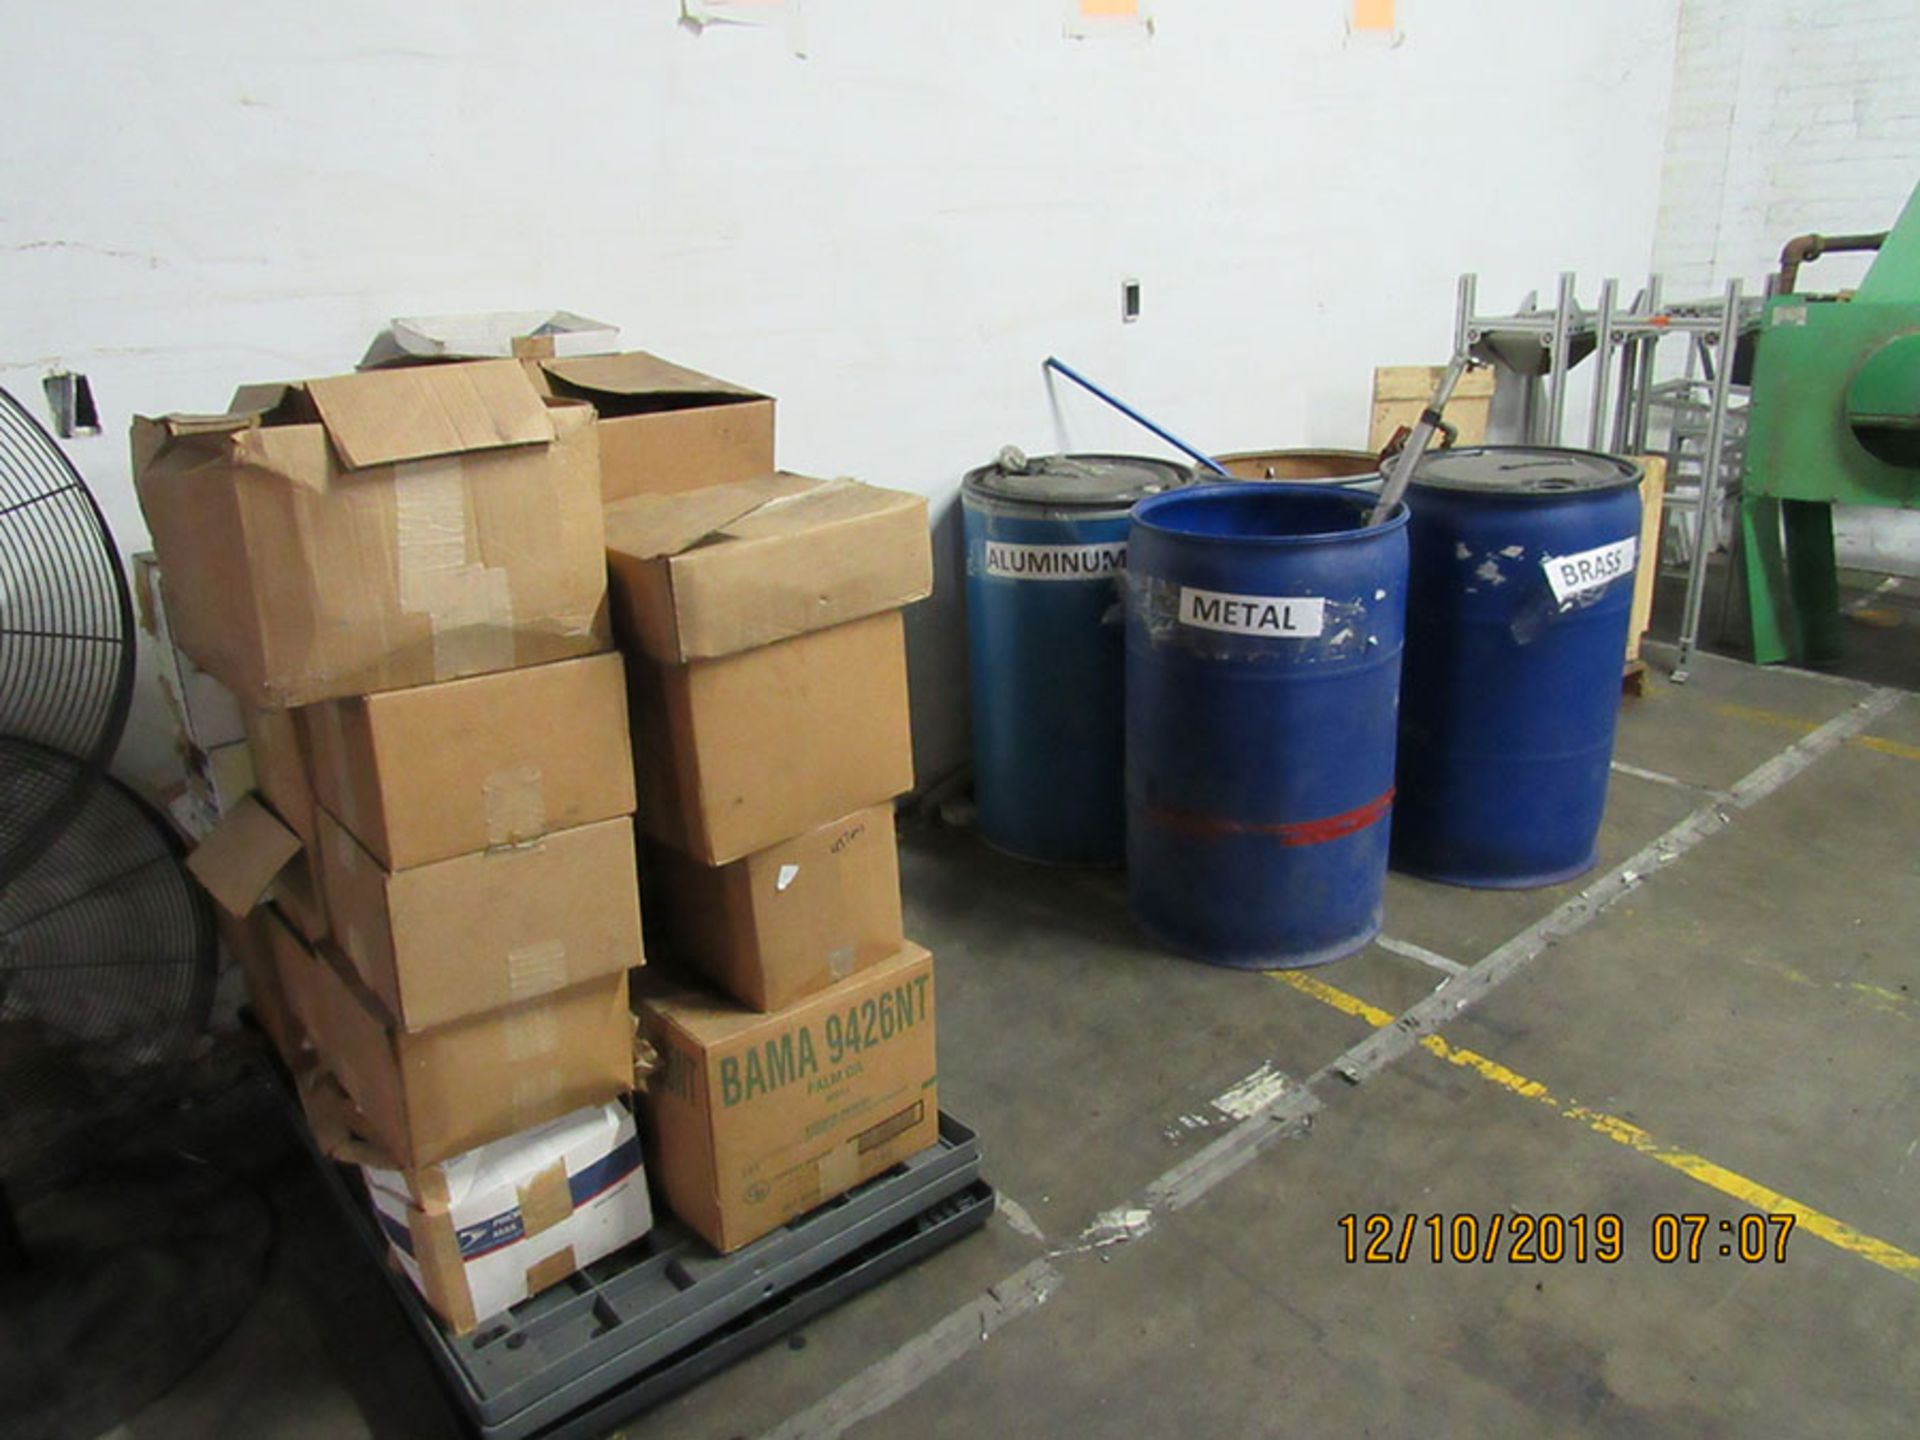 ALL PALLETS ON WALL, ASSORTED REPAIR PARTS, ALUMINUM FRAMEWORK, BARRELS WITH SCRAP METAL, BOXES OF - Image 4 of 5